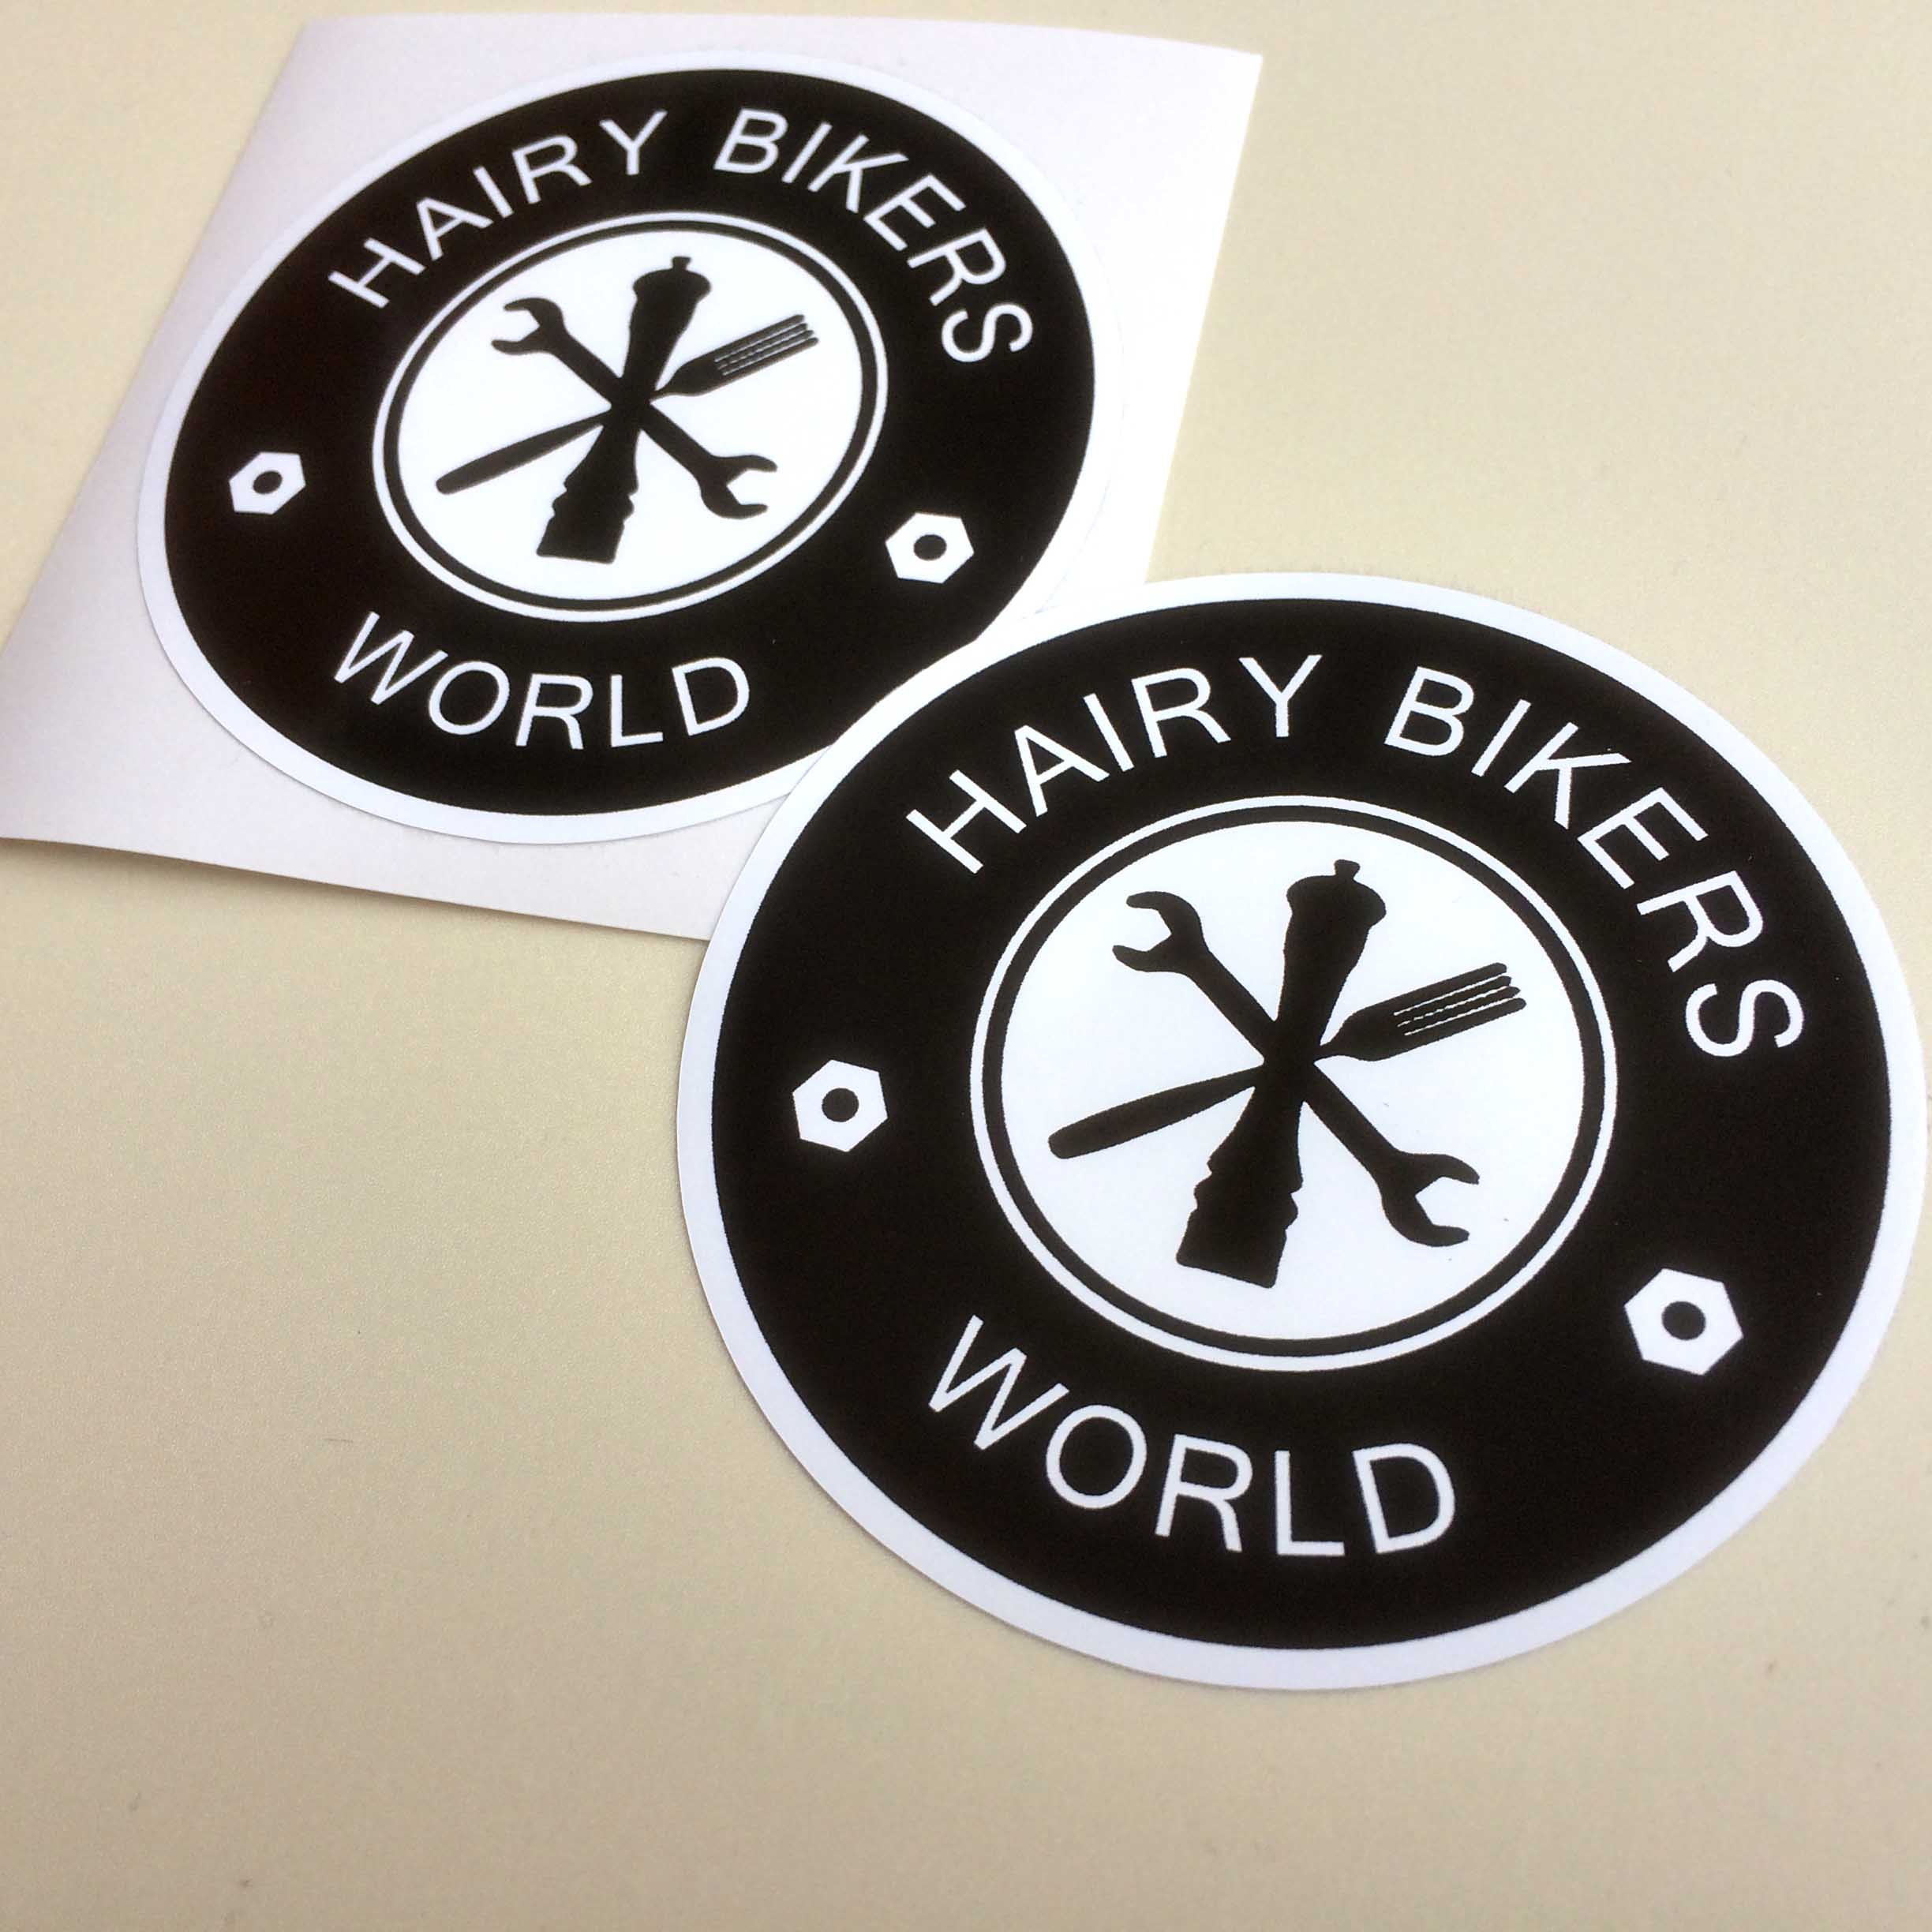 HAIRY BIKERS WORLD STICKERS. Two concentric circles in black and white. Hairy Bikers World in white lettering and two nuts on the outer circle. The white inner circle contains a spanner, a peppermill and a fork in black.